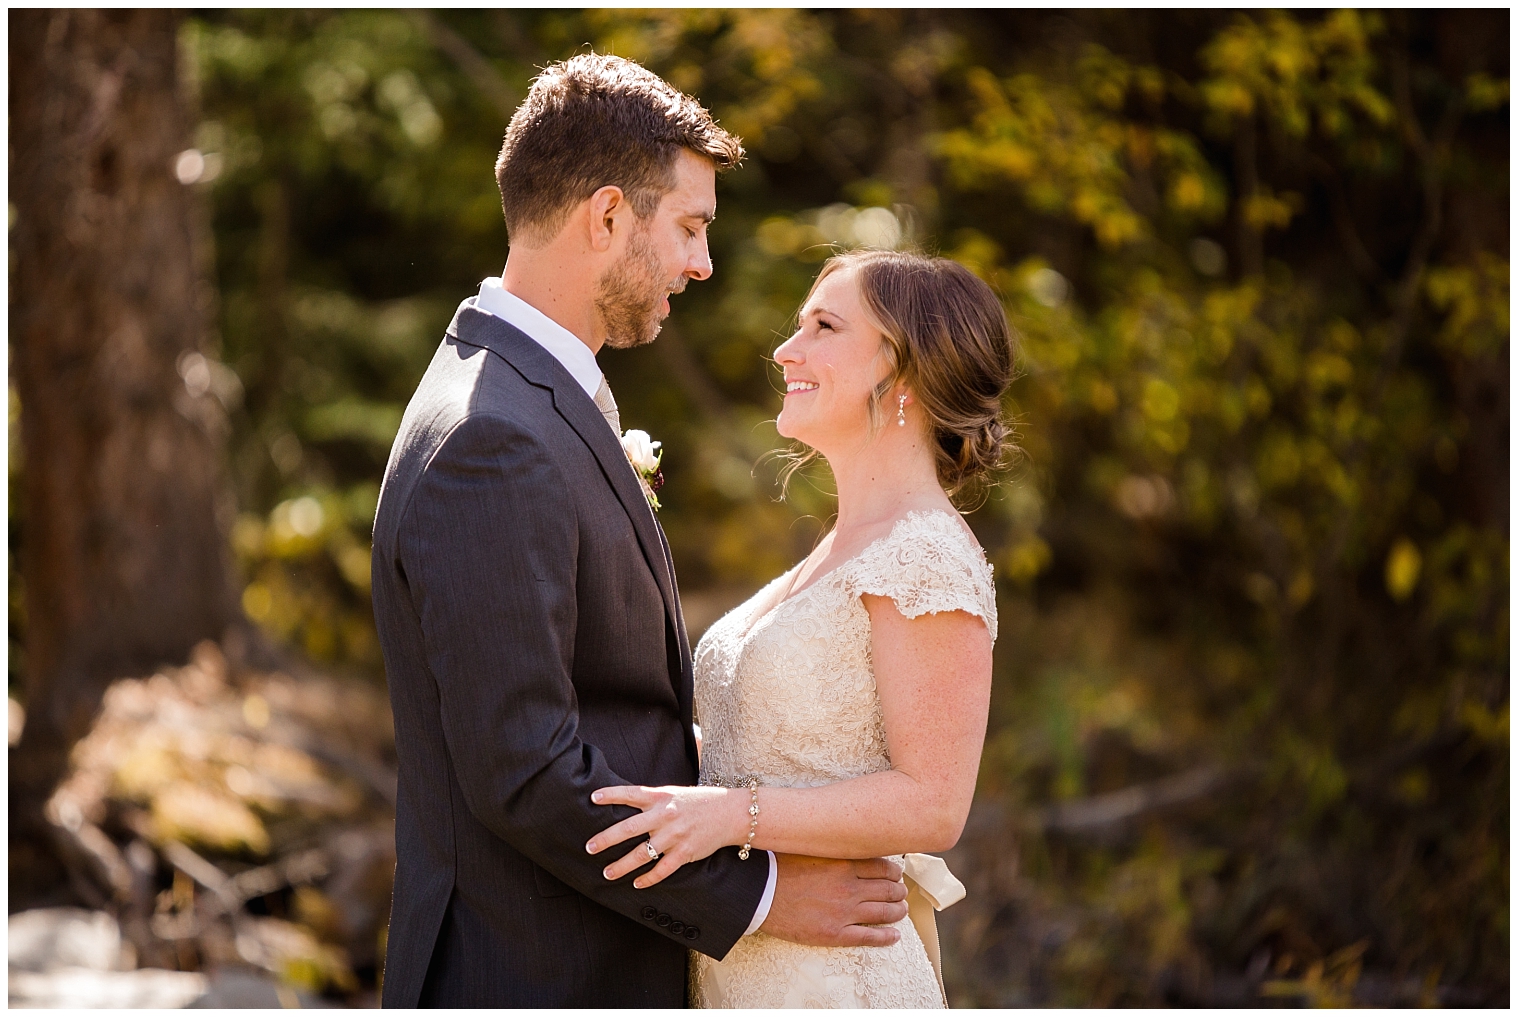 Before their Copper Mountain wedding, the groom smiles down at his bride during their first look portraits.